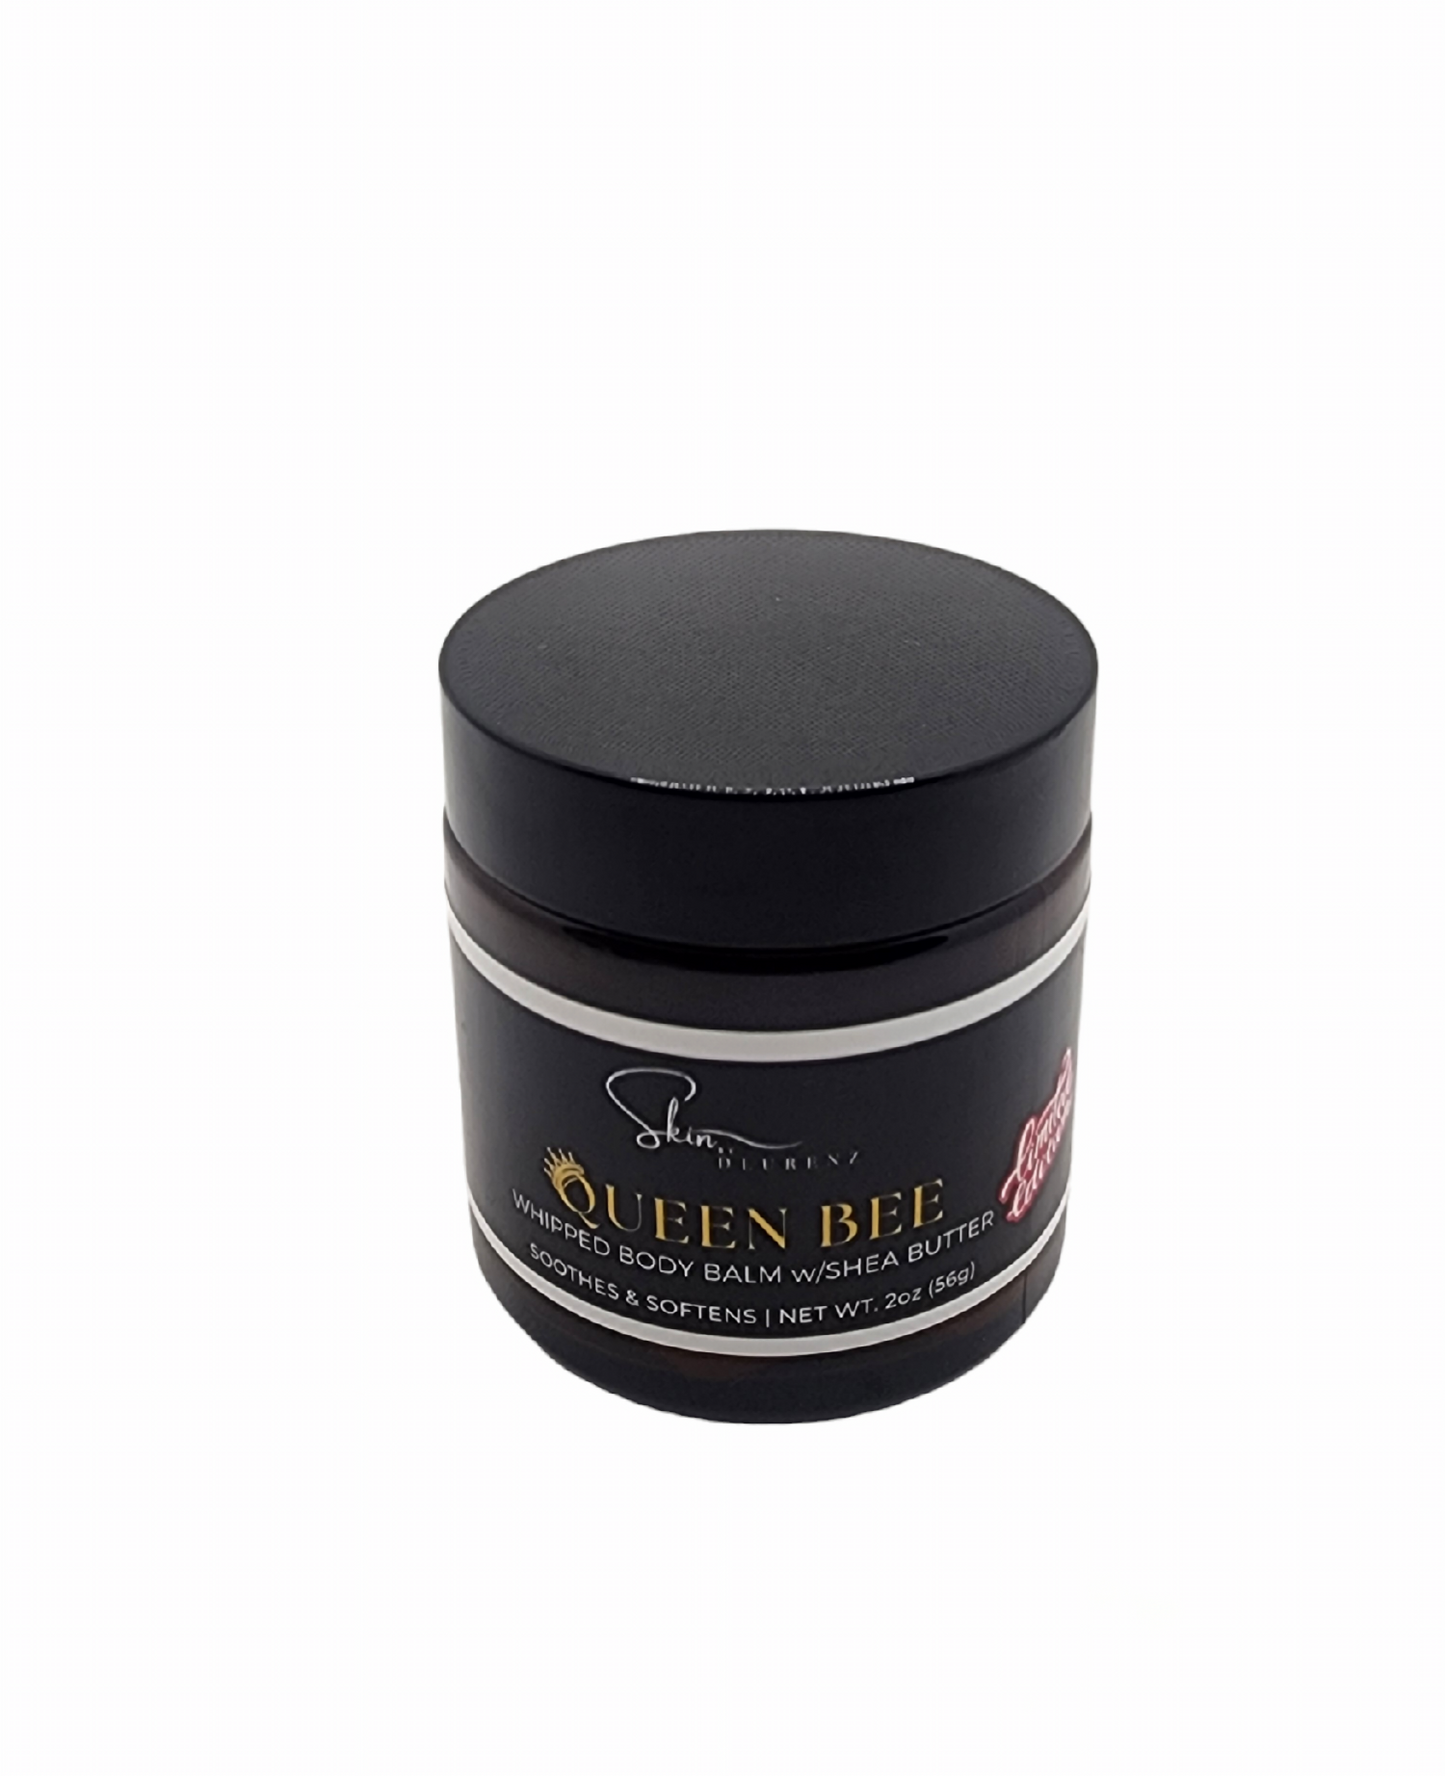 Queen Bee Body Balm (Skin by DLuRenz)| Whipped Body Balm with Shea Butter, 2oz